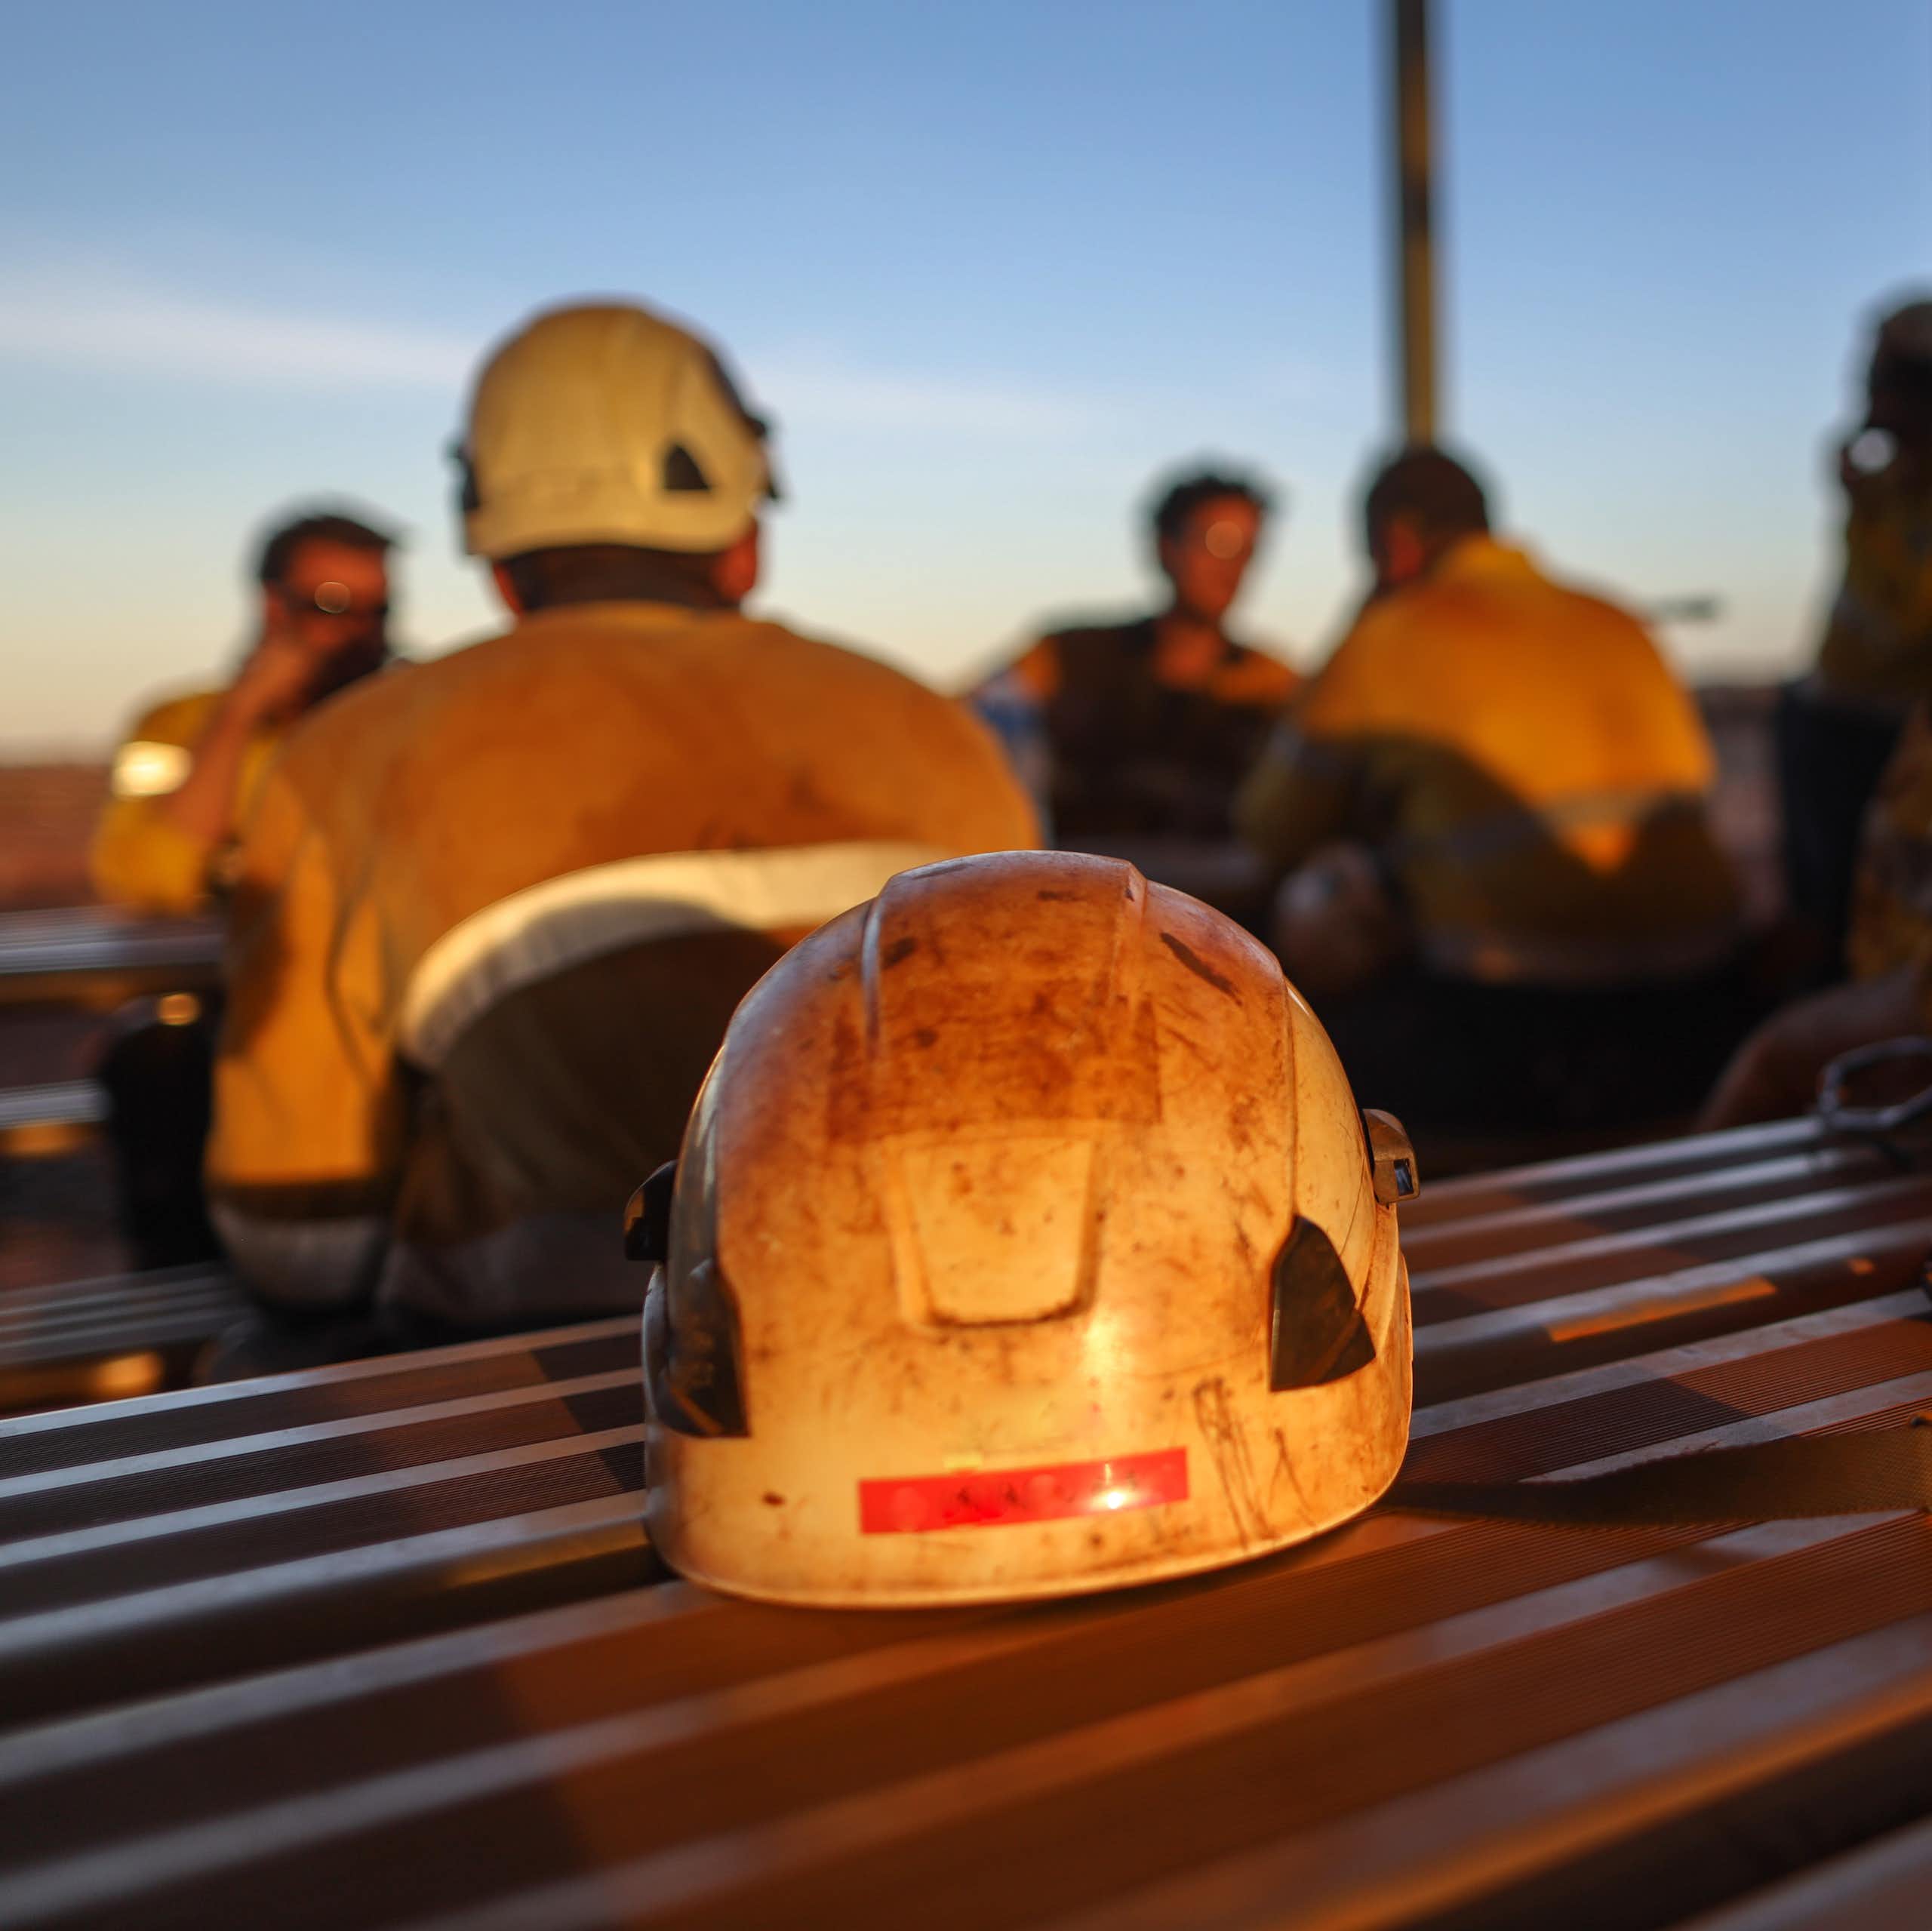 Miner safety helmets on a table with blurred figures in the background